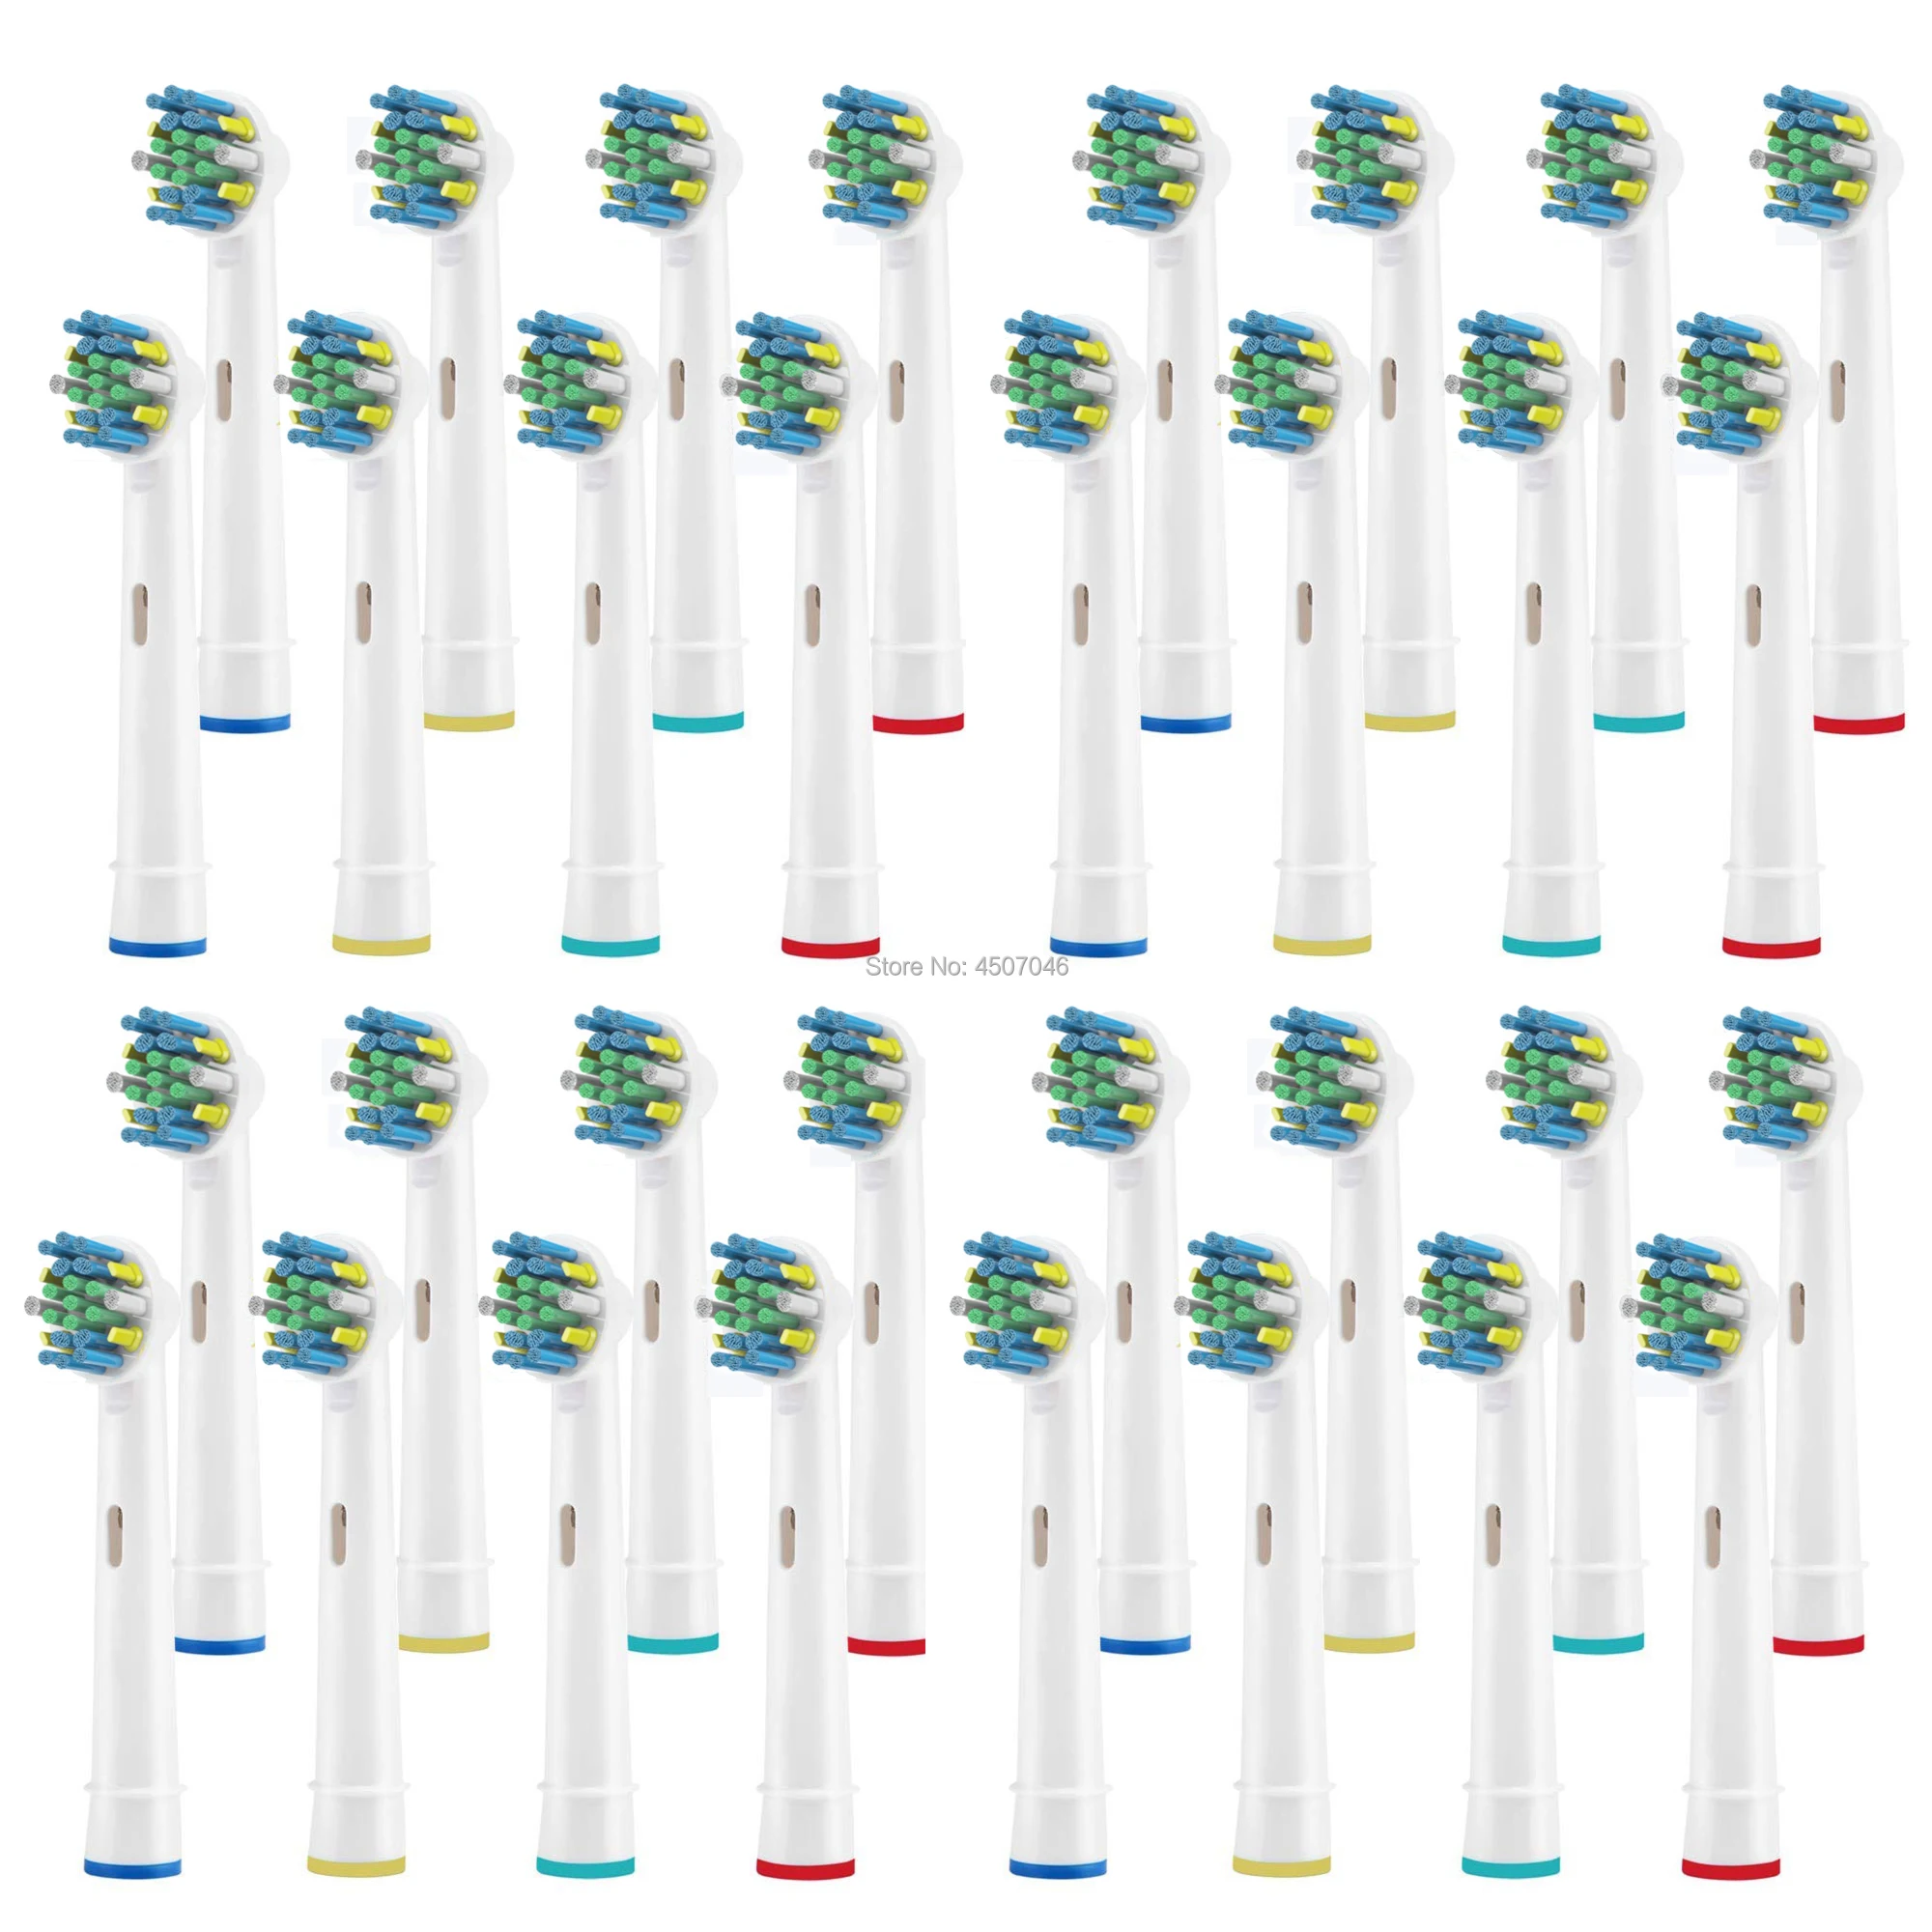 

32 Replacement Brush Heads For Oral-B Electric Toothbrush Fit Advance Power/Pro Health/Triumph/3D Excel/Vitality Precision Clean